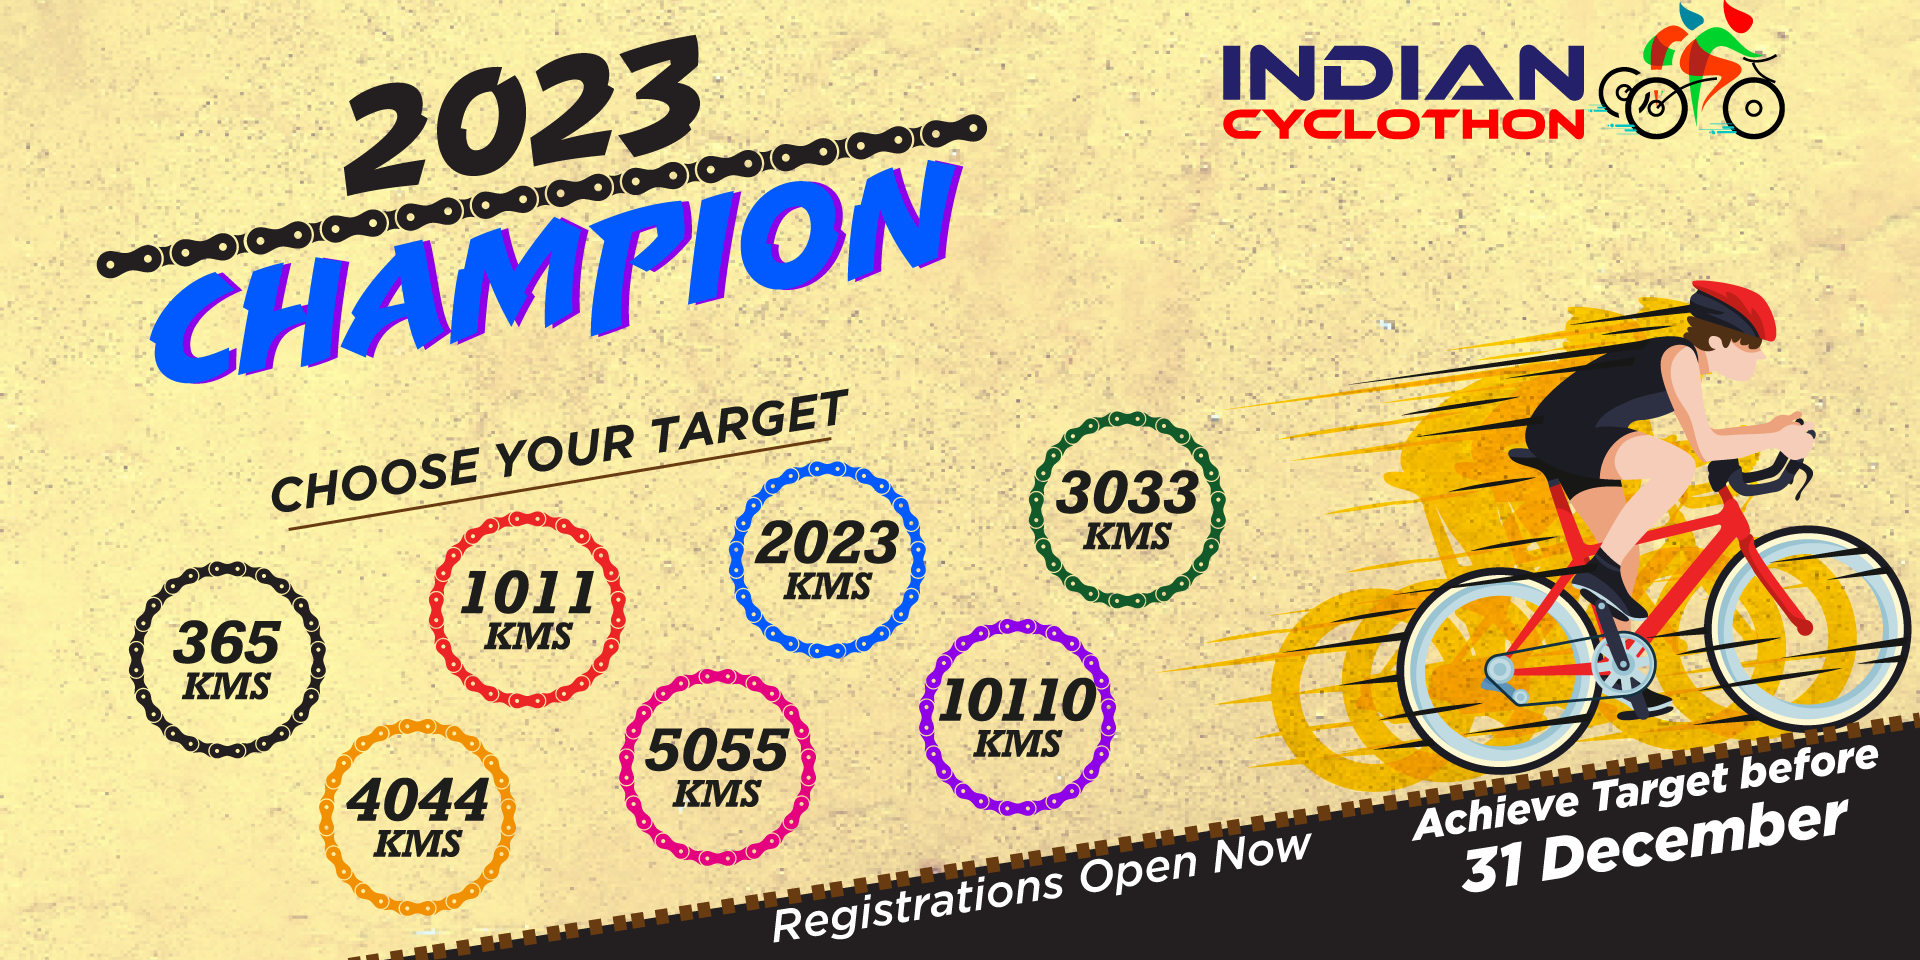 Ride 365 Kms in 2023 (Champion) image